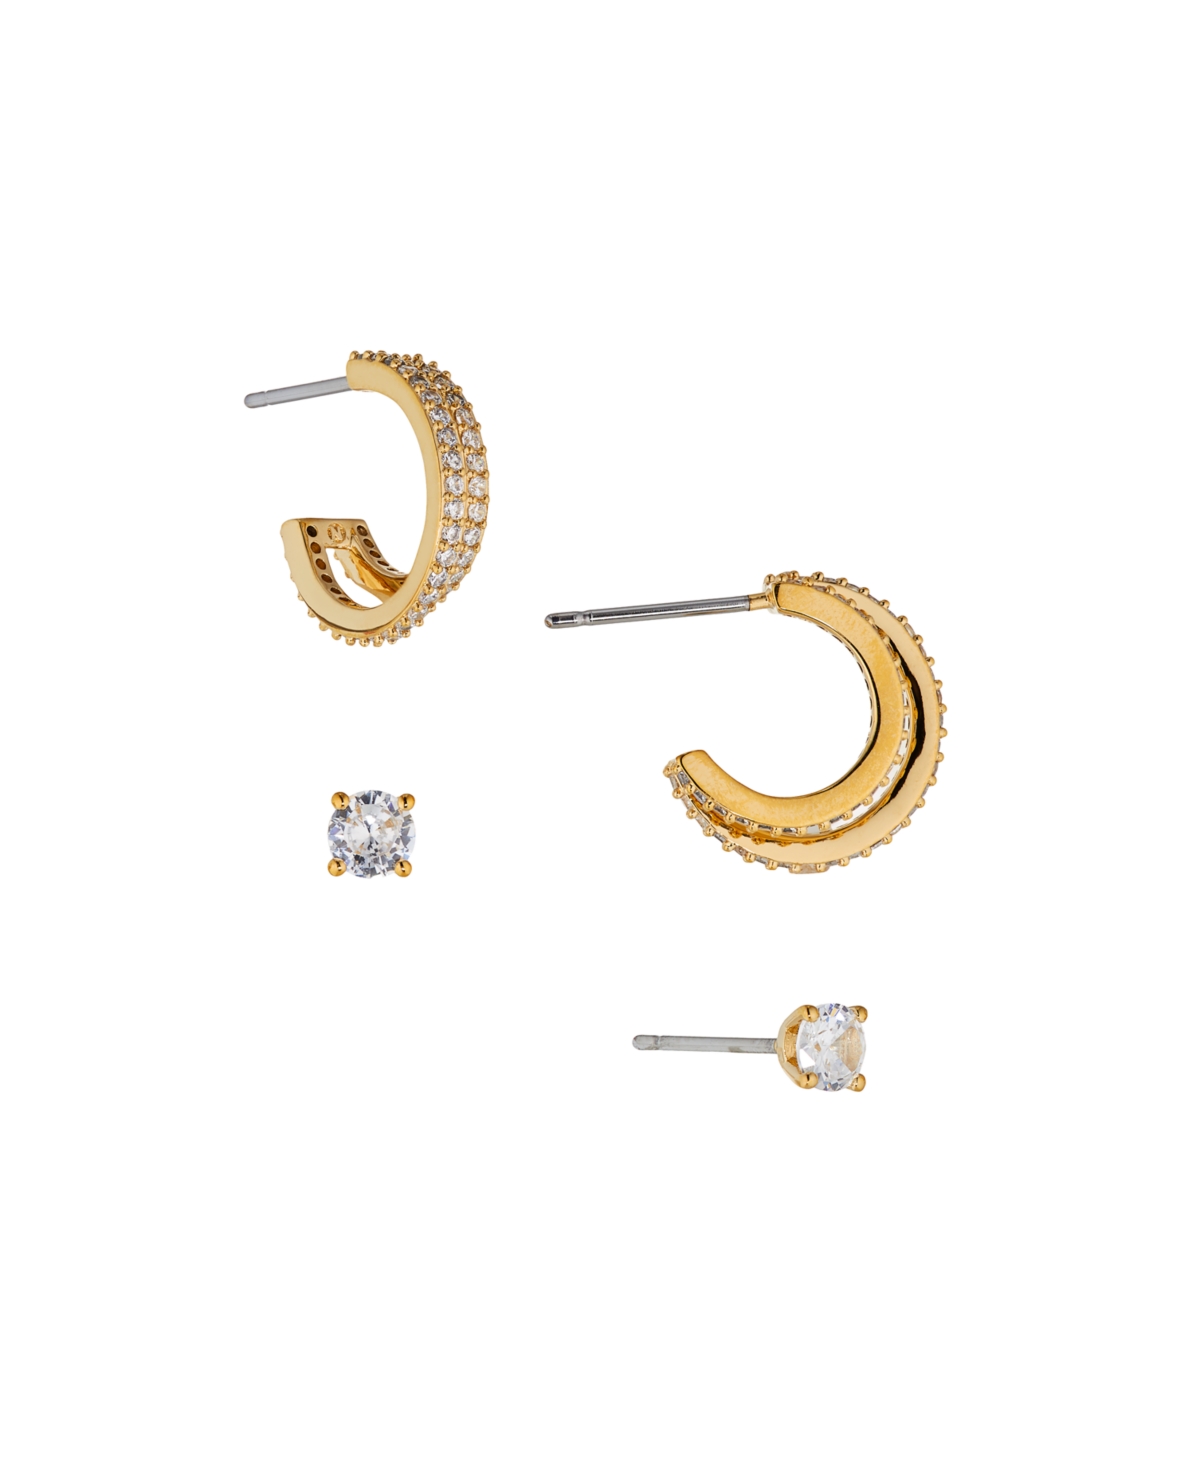 Ava Nadri Small Hoop and Stud Earring in Silver-Tone Brass Set 4 Pieces